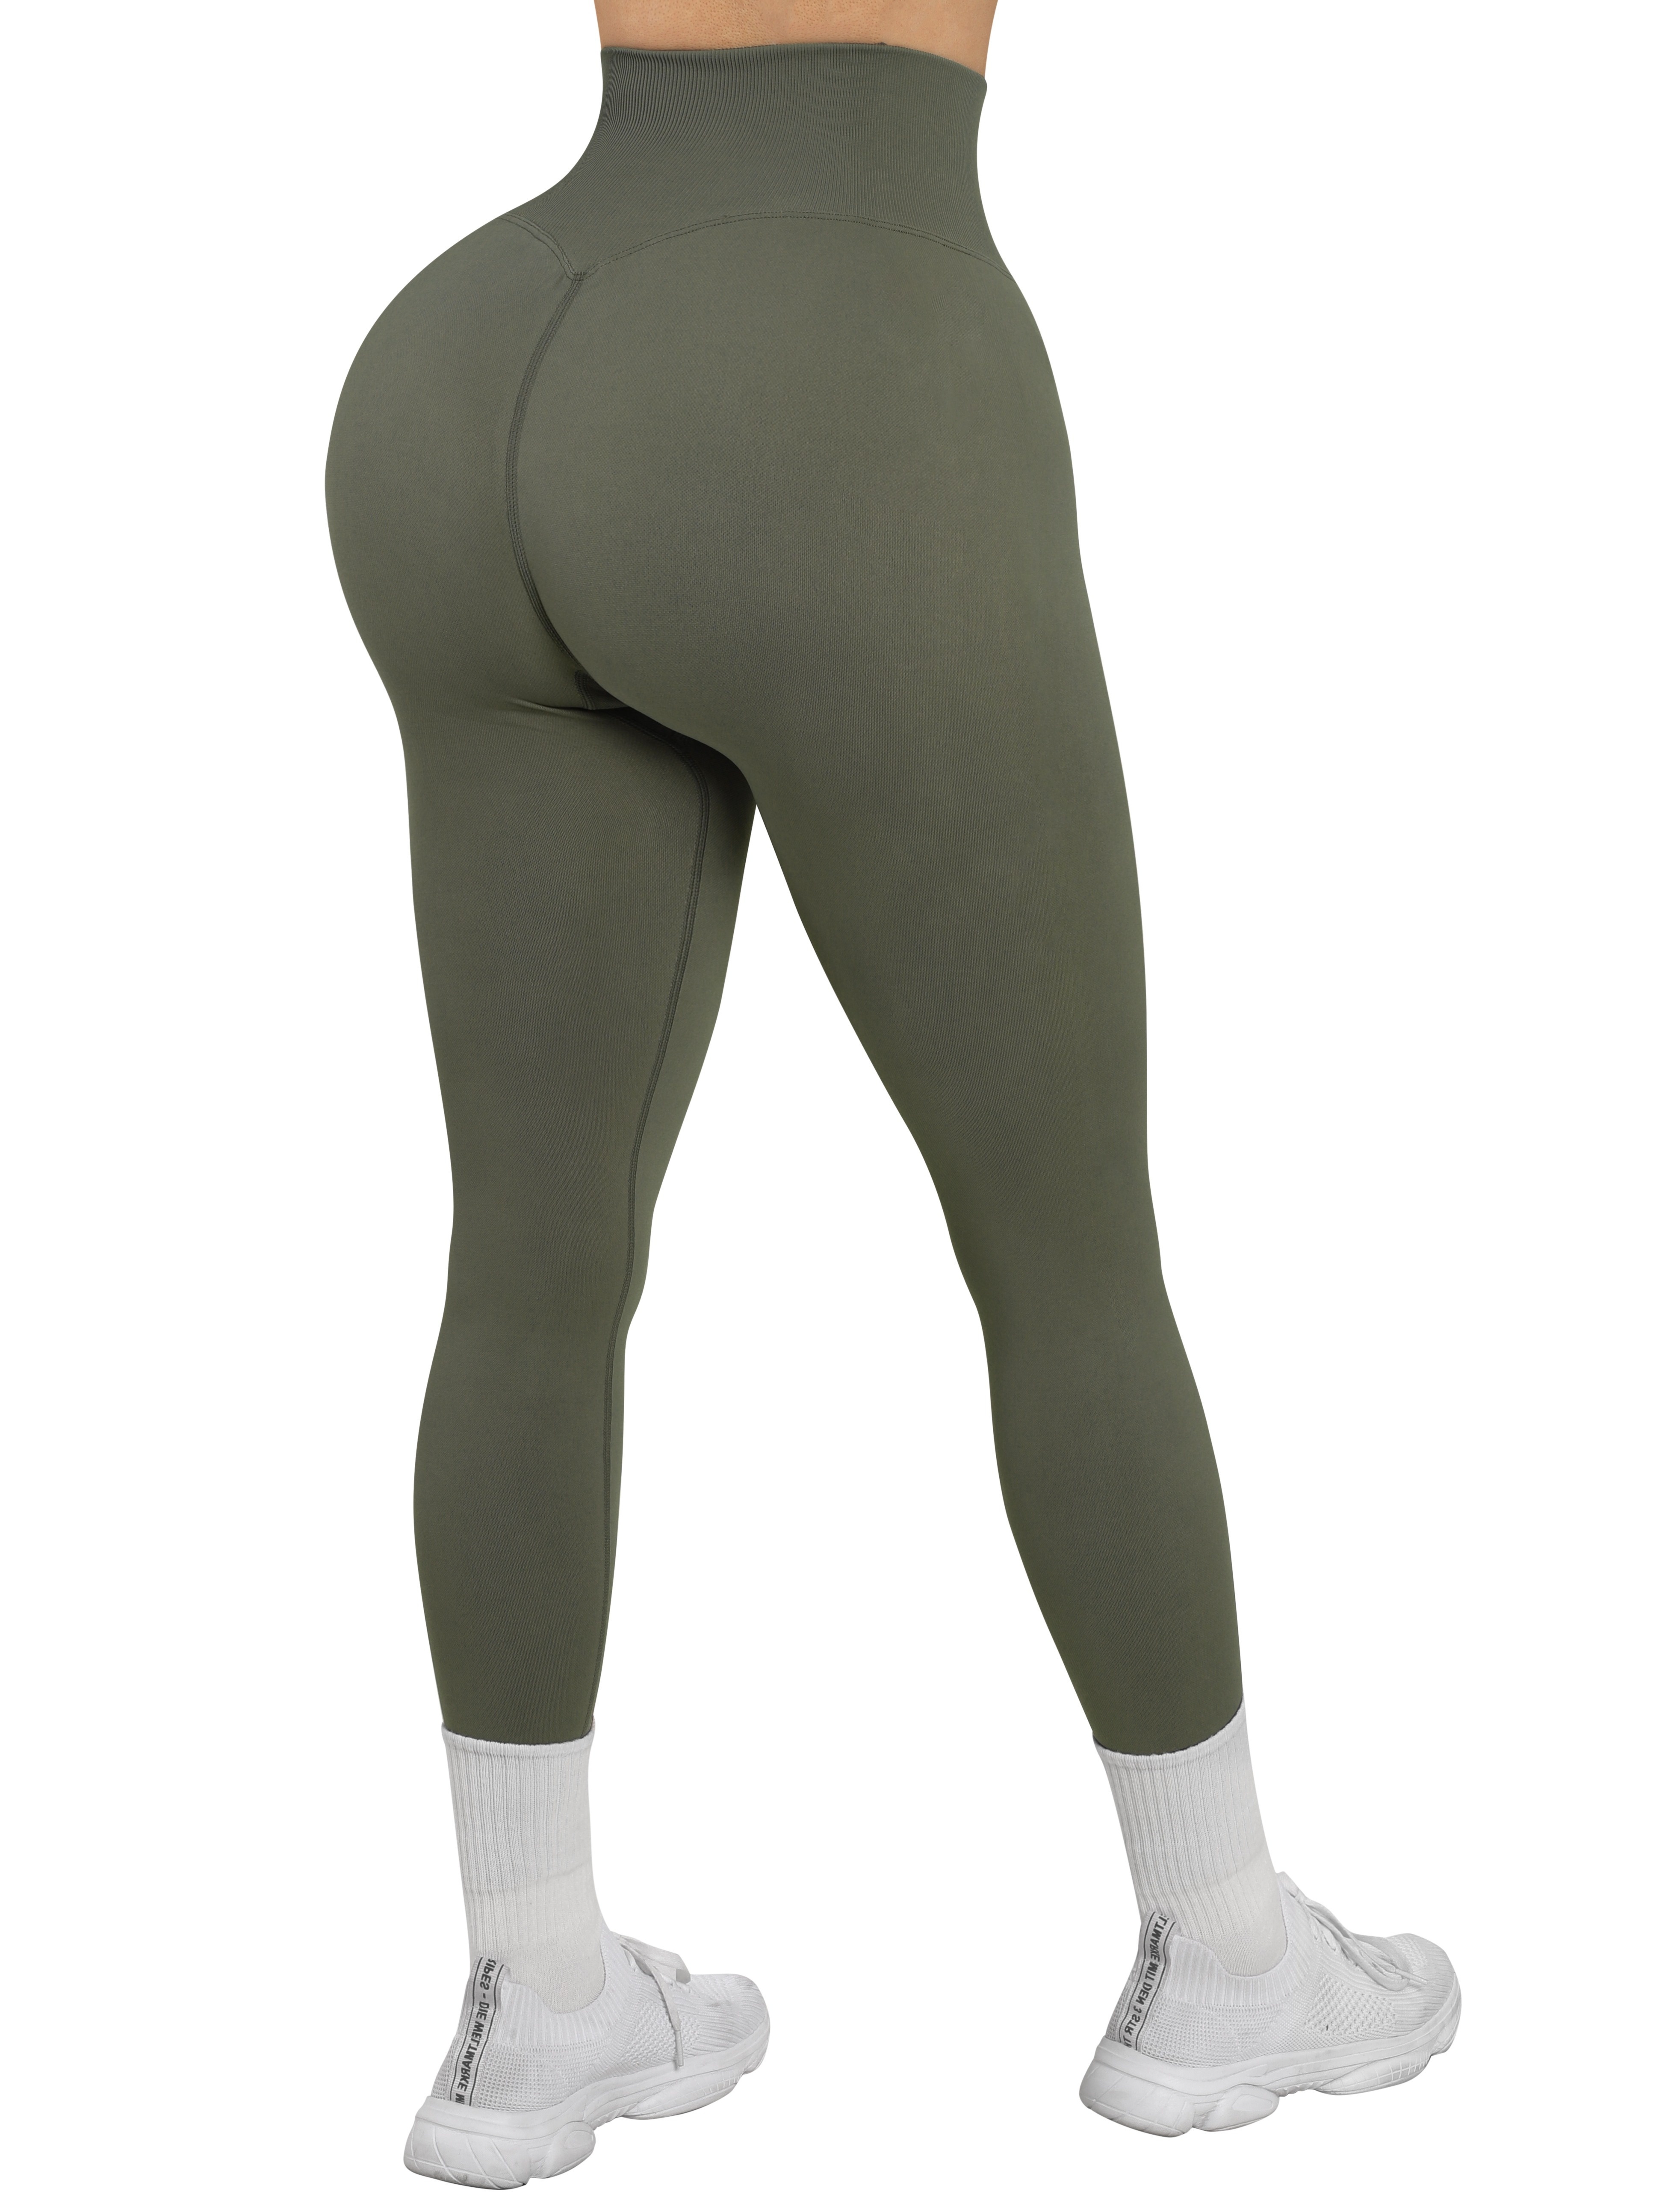 Buy THE GYM PEOPLE Thick High Waist Yoga Pants with Pockets, Tummy Control  Workout Running Yoga Leggings for Women, Army Green Camo, Small at